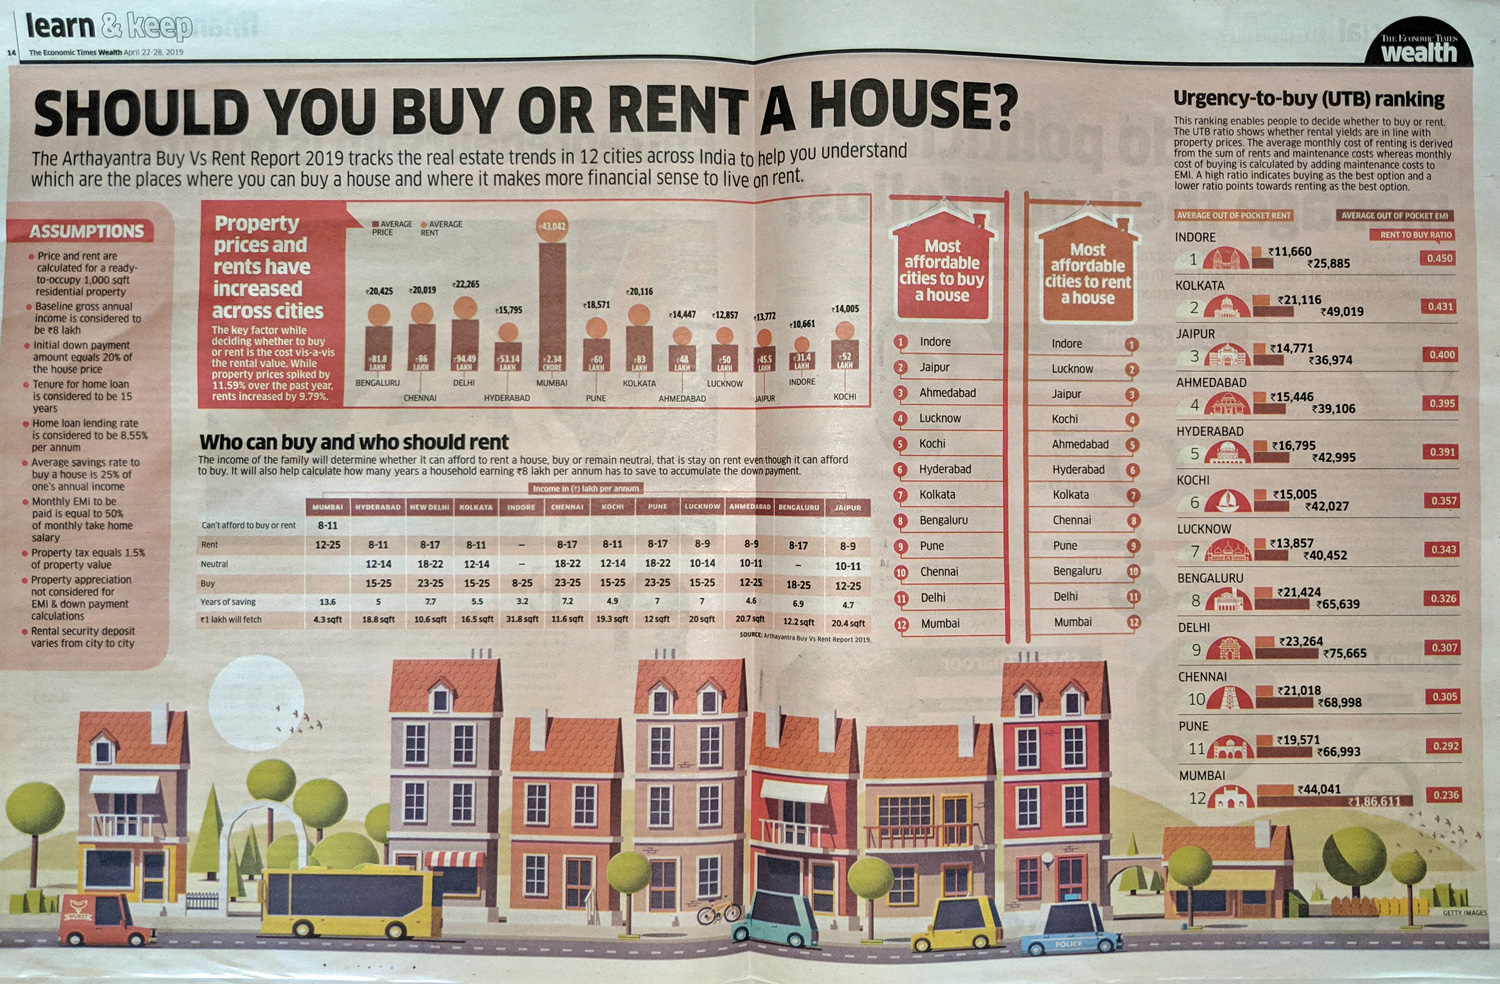 The Arthayantra Buy Vs Rent Report 2019 tracks the real estate trends in 12 cities across India to help you understand which are the places where you can buy a house and where it makes more financial sense to live on rent.    Read more at: //economictimes.indiatimes.com/articleshow/68963075.cms?utm_source=contentofinterest&utm_medium=text&utm_campaign=cppst